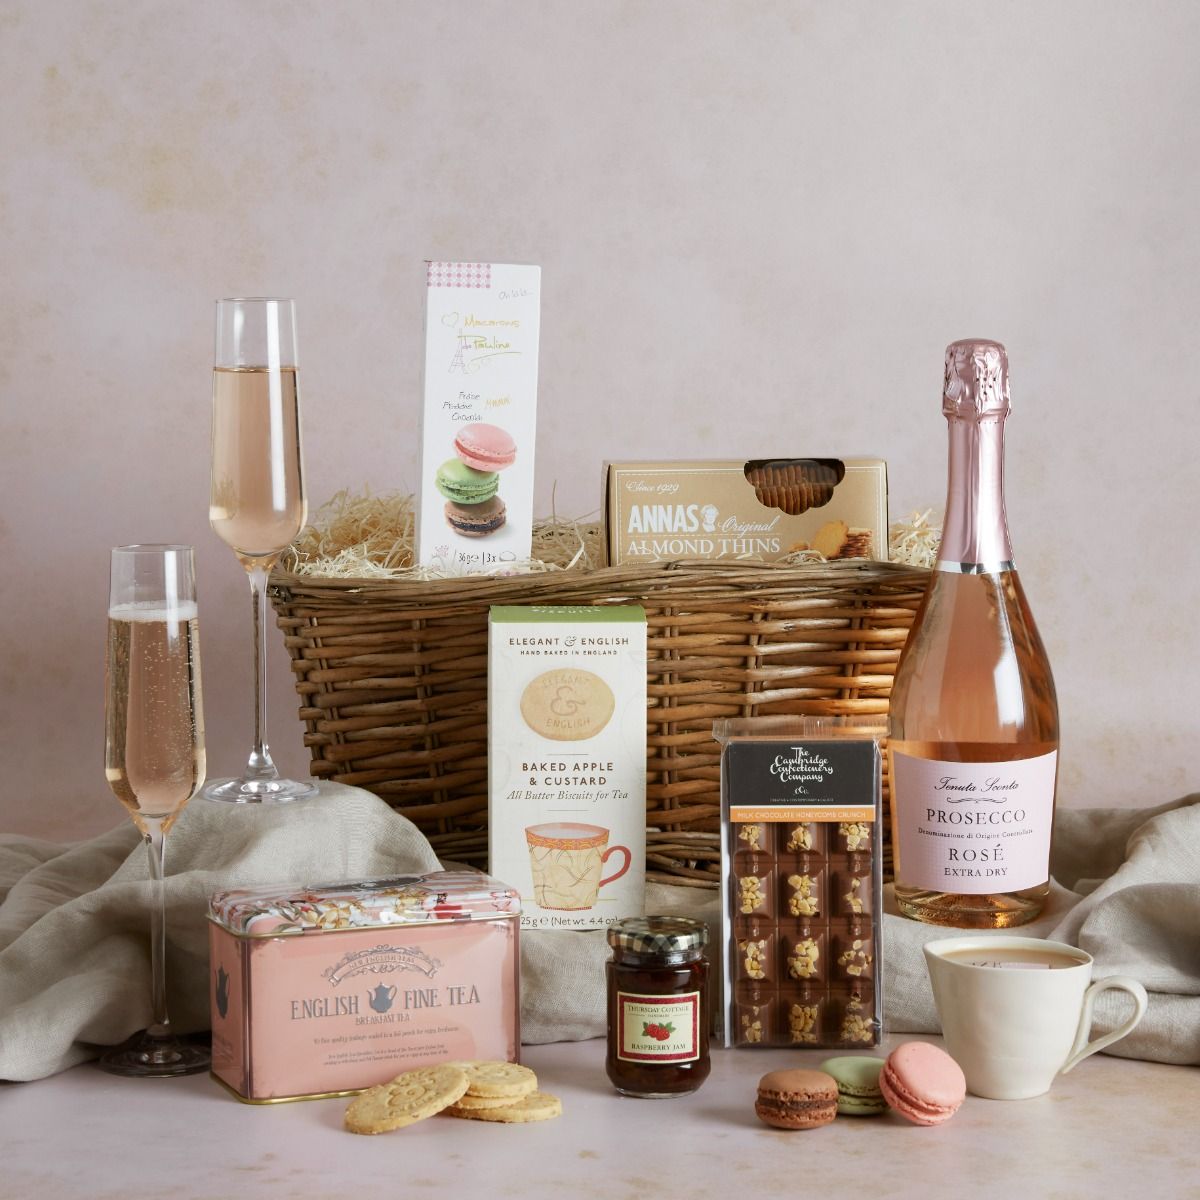 Valentine's Couples Sharing Hamper with contents on display and gift basket